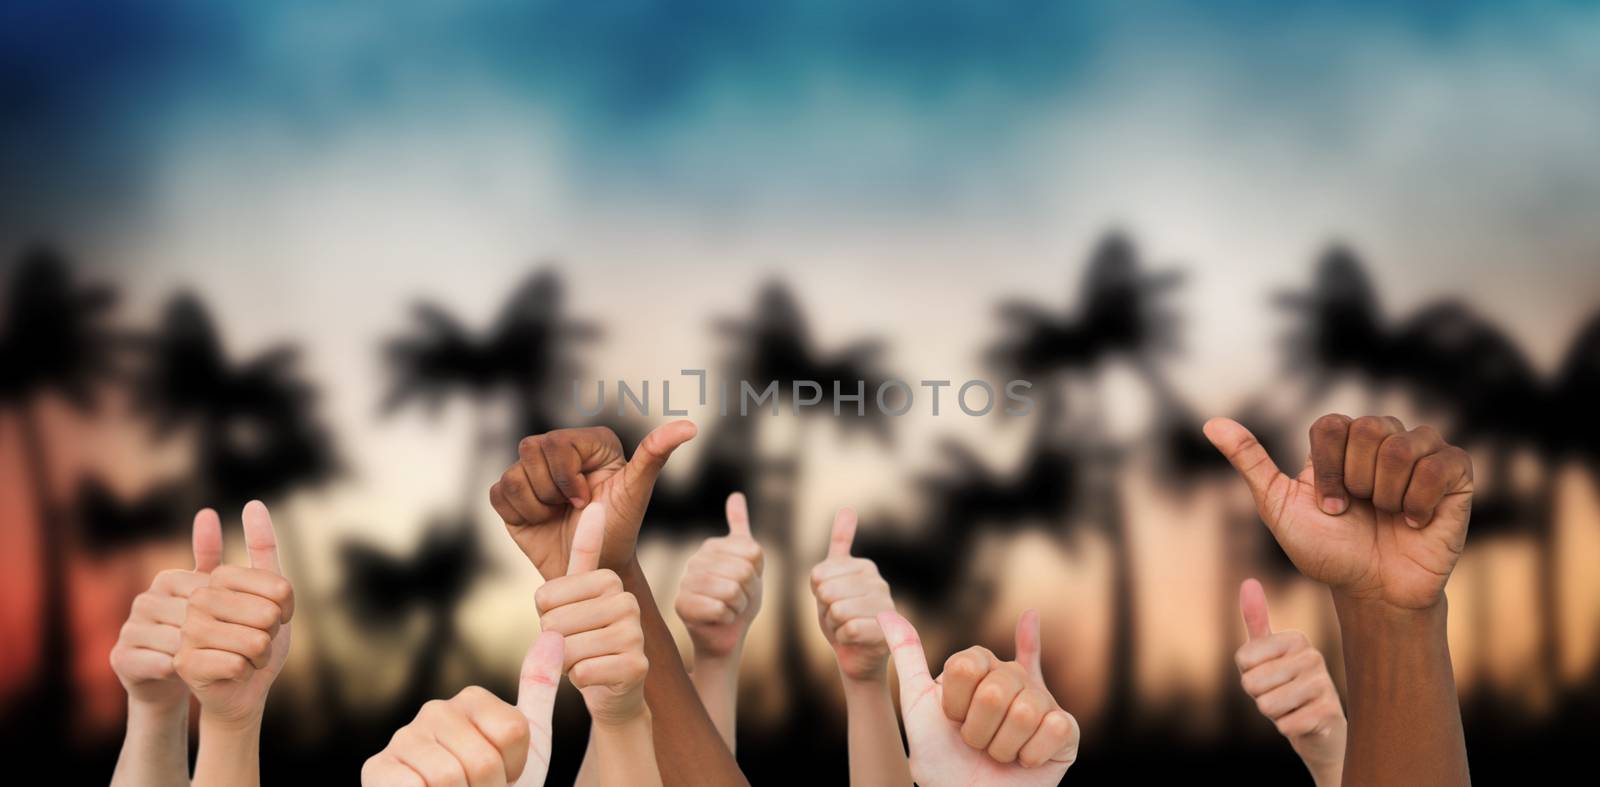 Hands giving thumbs up  against digitally generated palm tree background